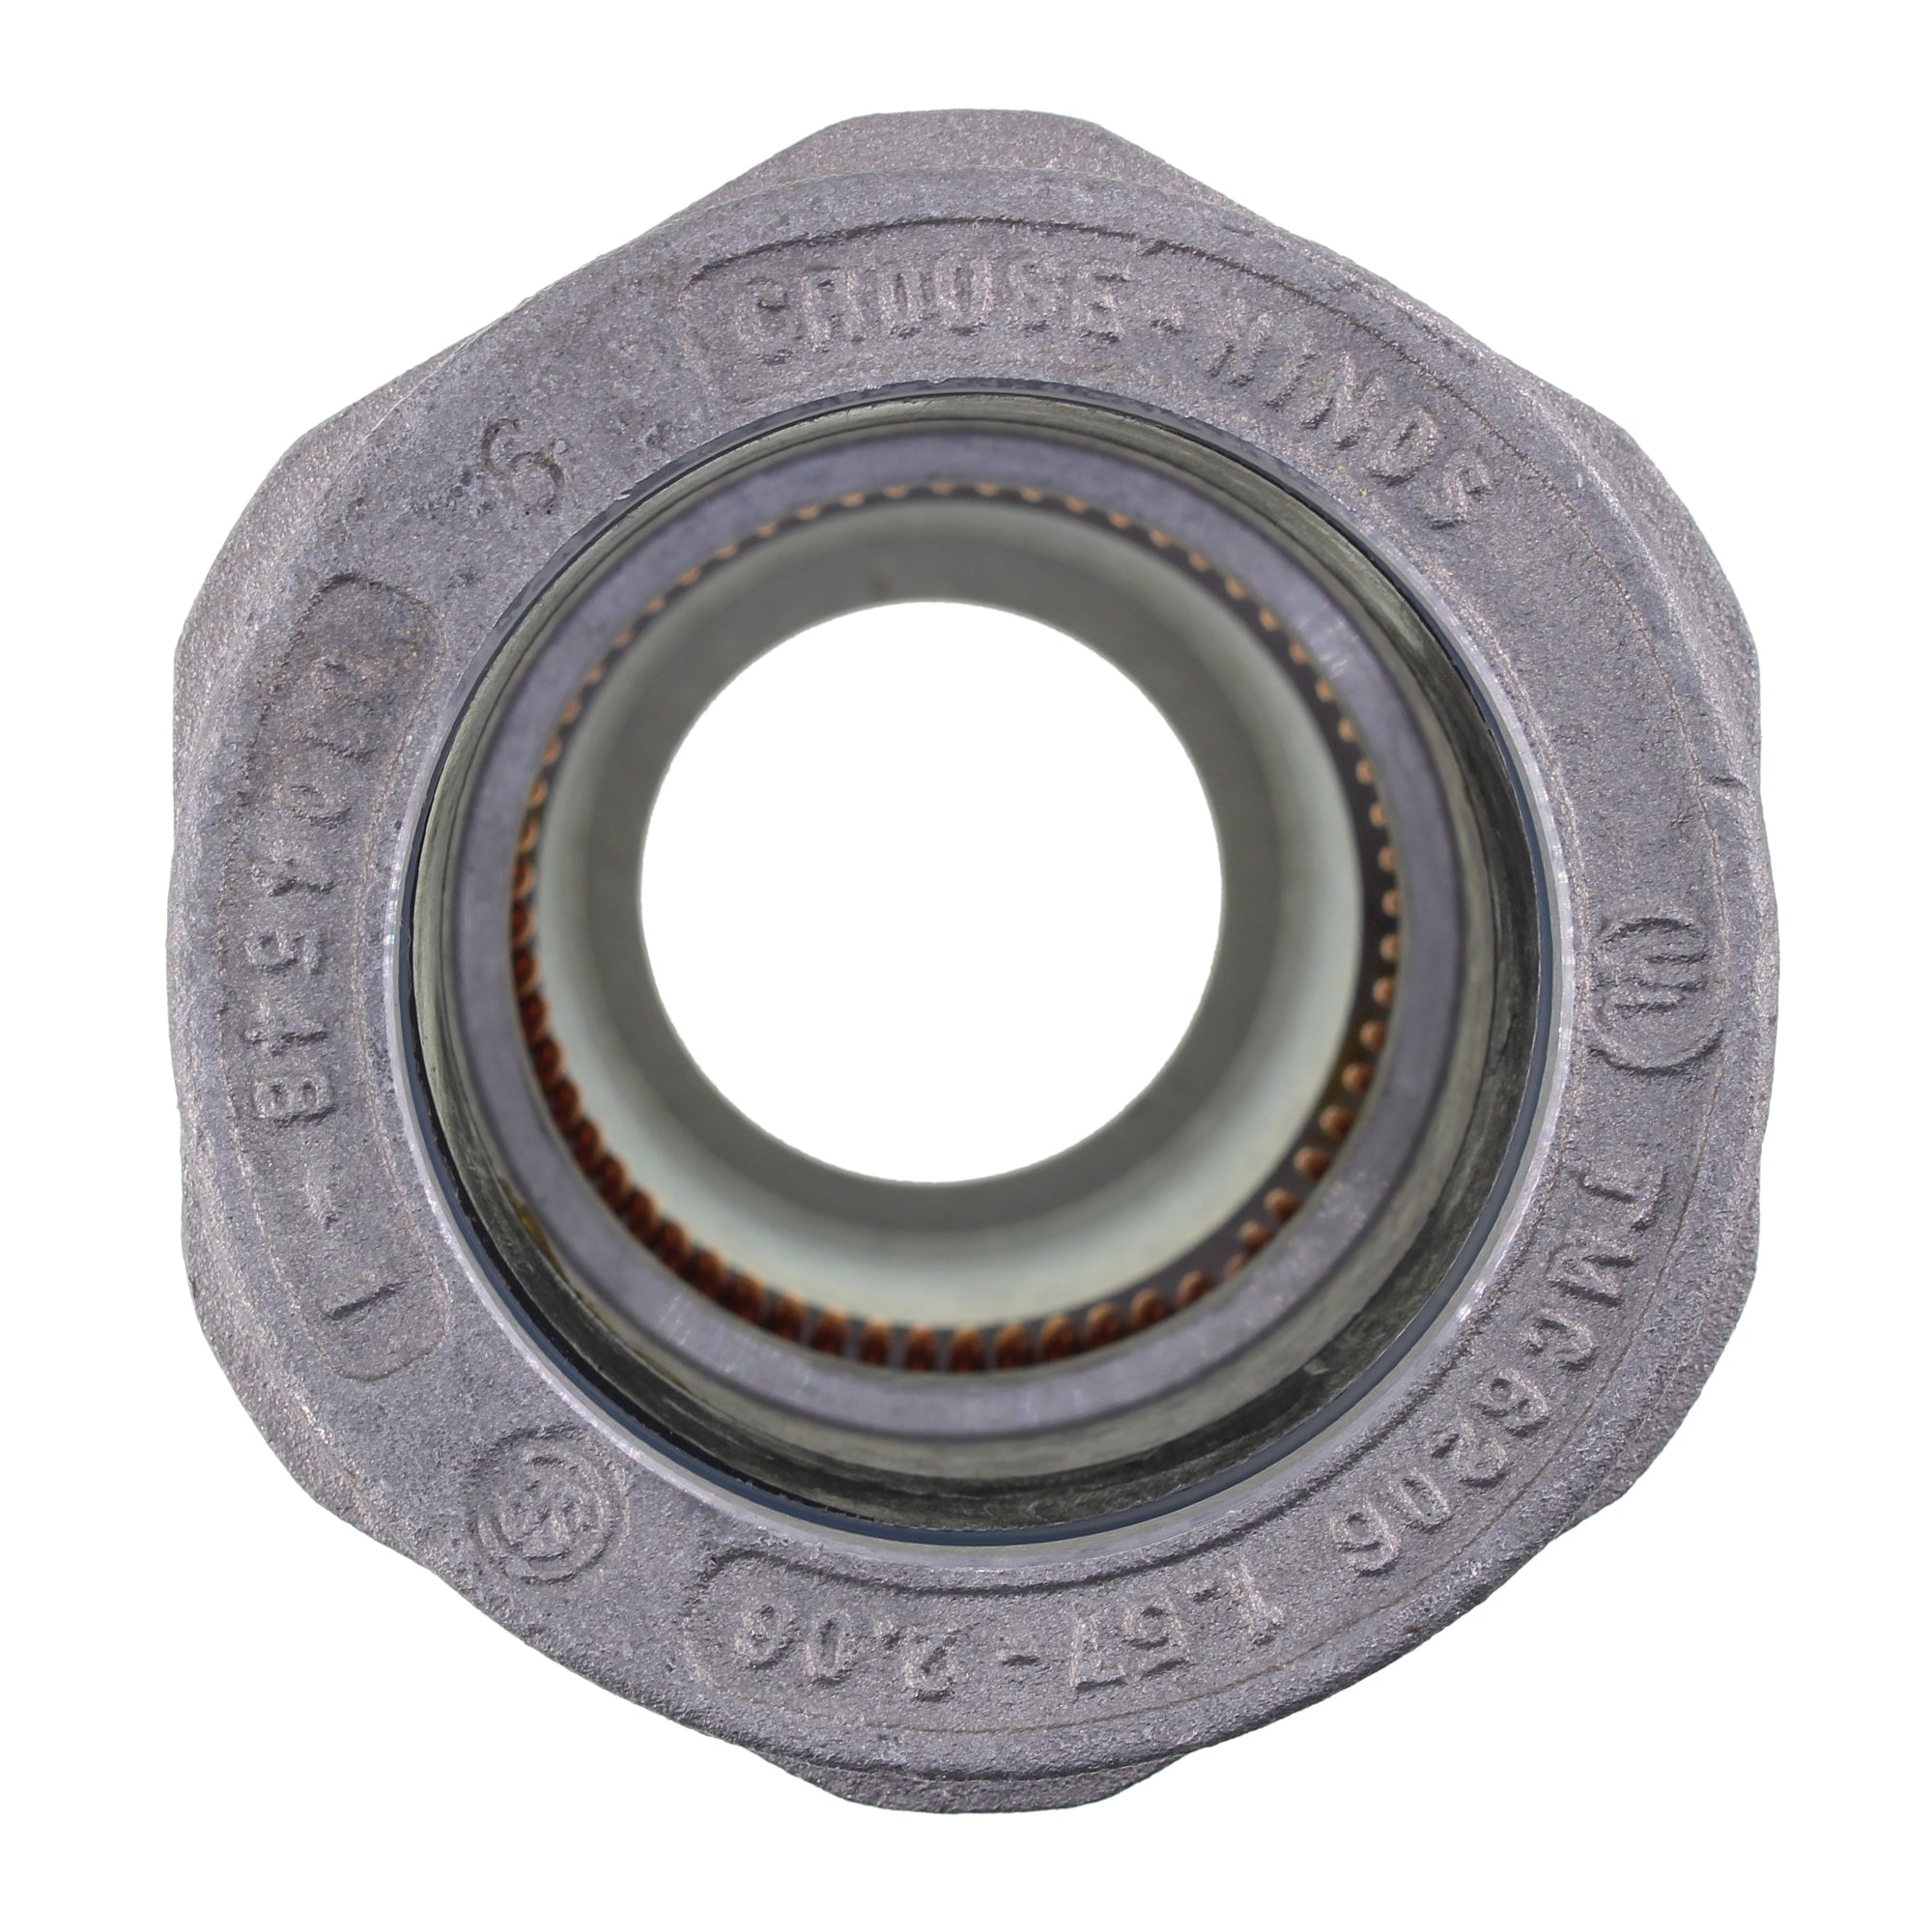 Crouse Hinds, COOPER CROUSE-HINDS TMC6206 CORD GRIP GLAND MC CABLE CONNECTOR, ALUMINUM, 2"